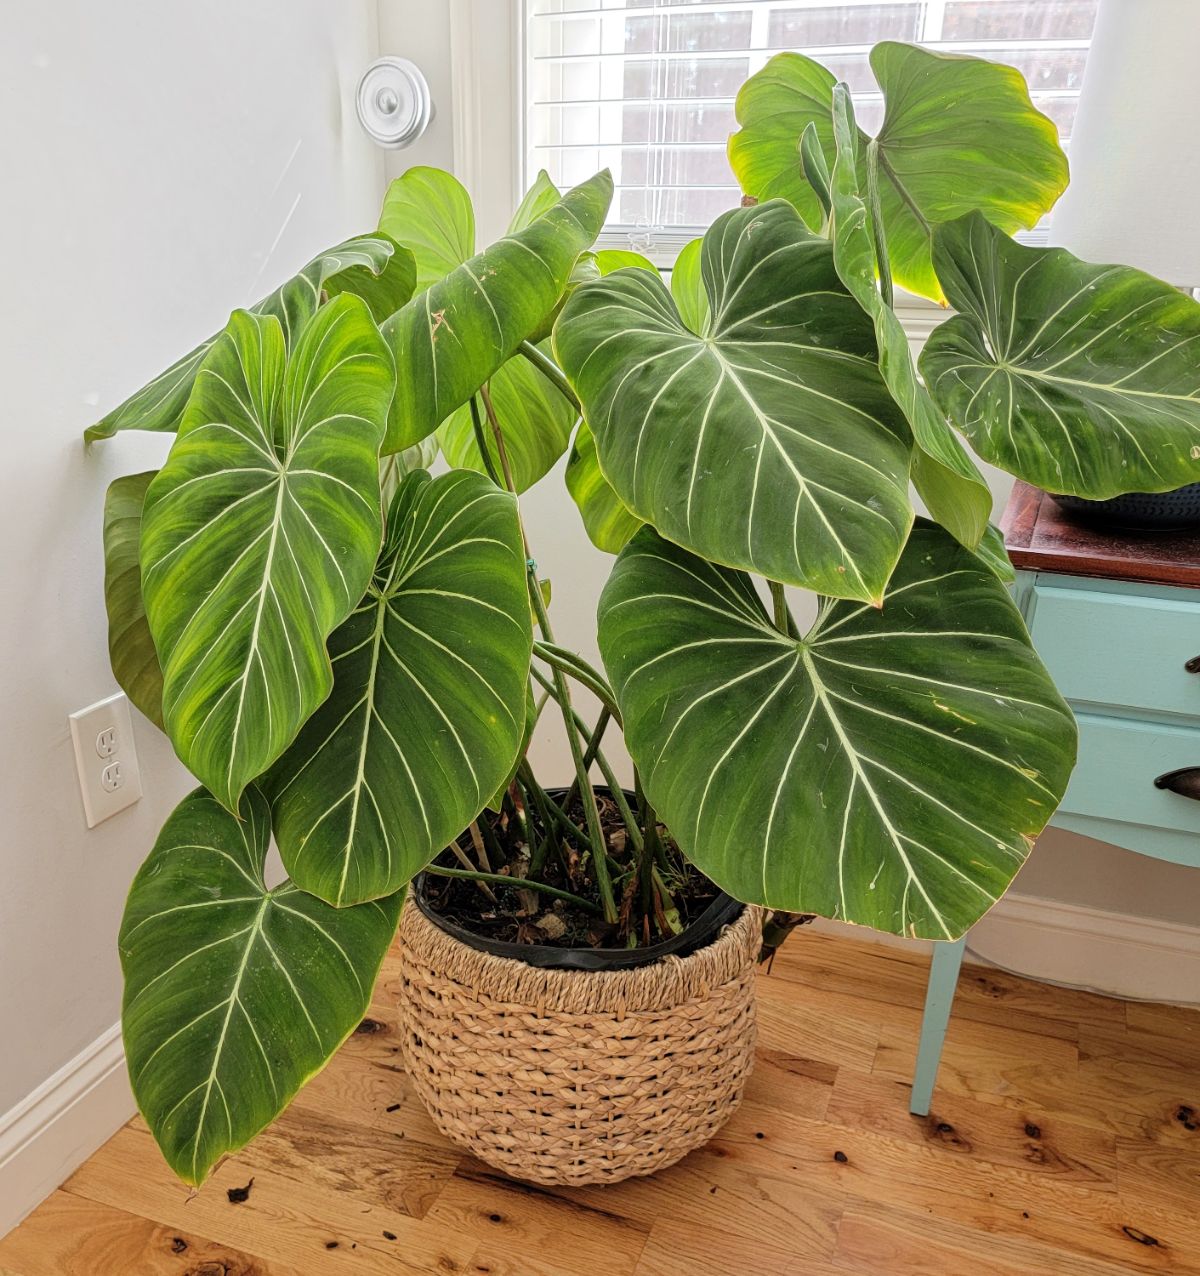 A beautiful Philodendron Gloriosum growing in a pot.